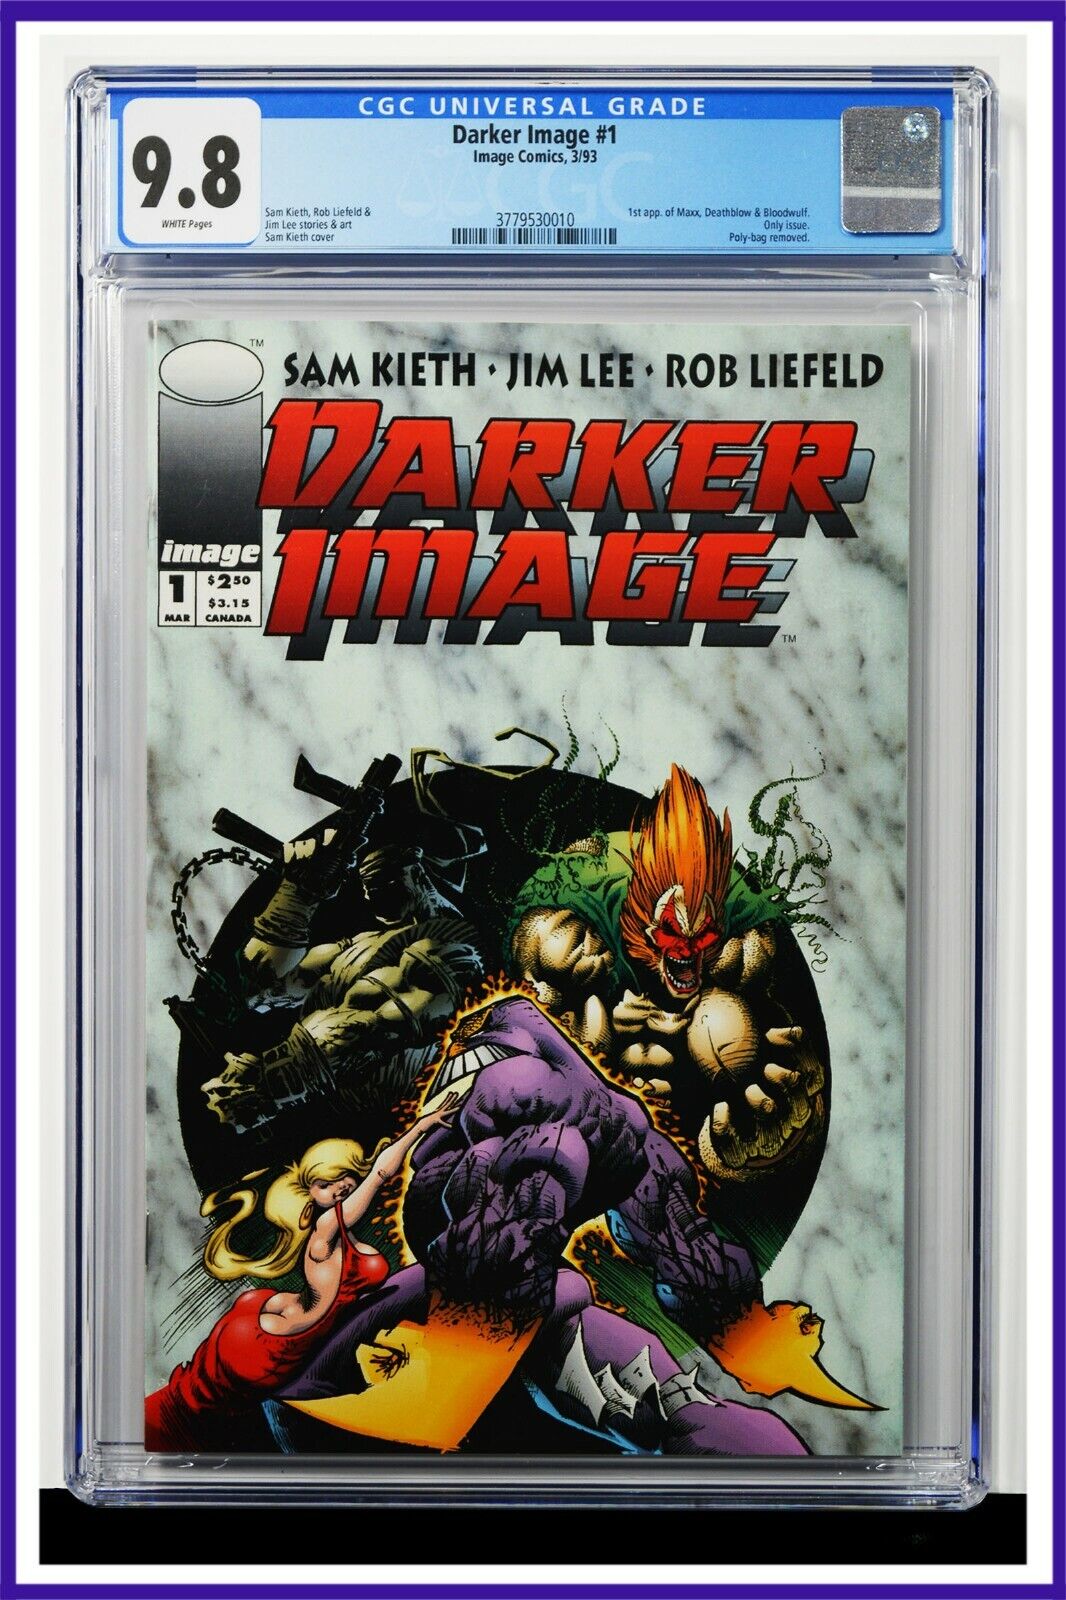 Darker Image #1 CGC Graded 9.8 Image March 1993 White Pages Comic Book.